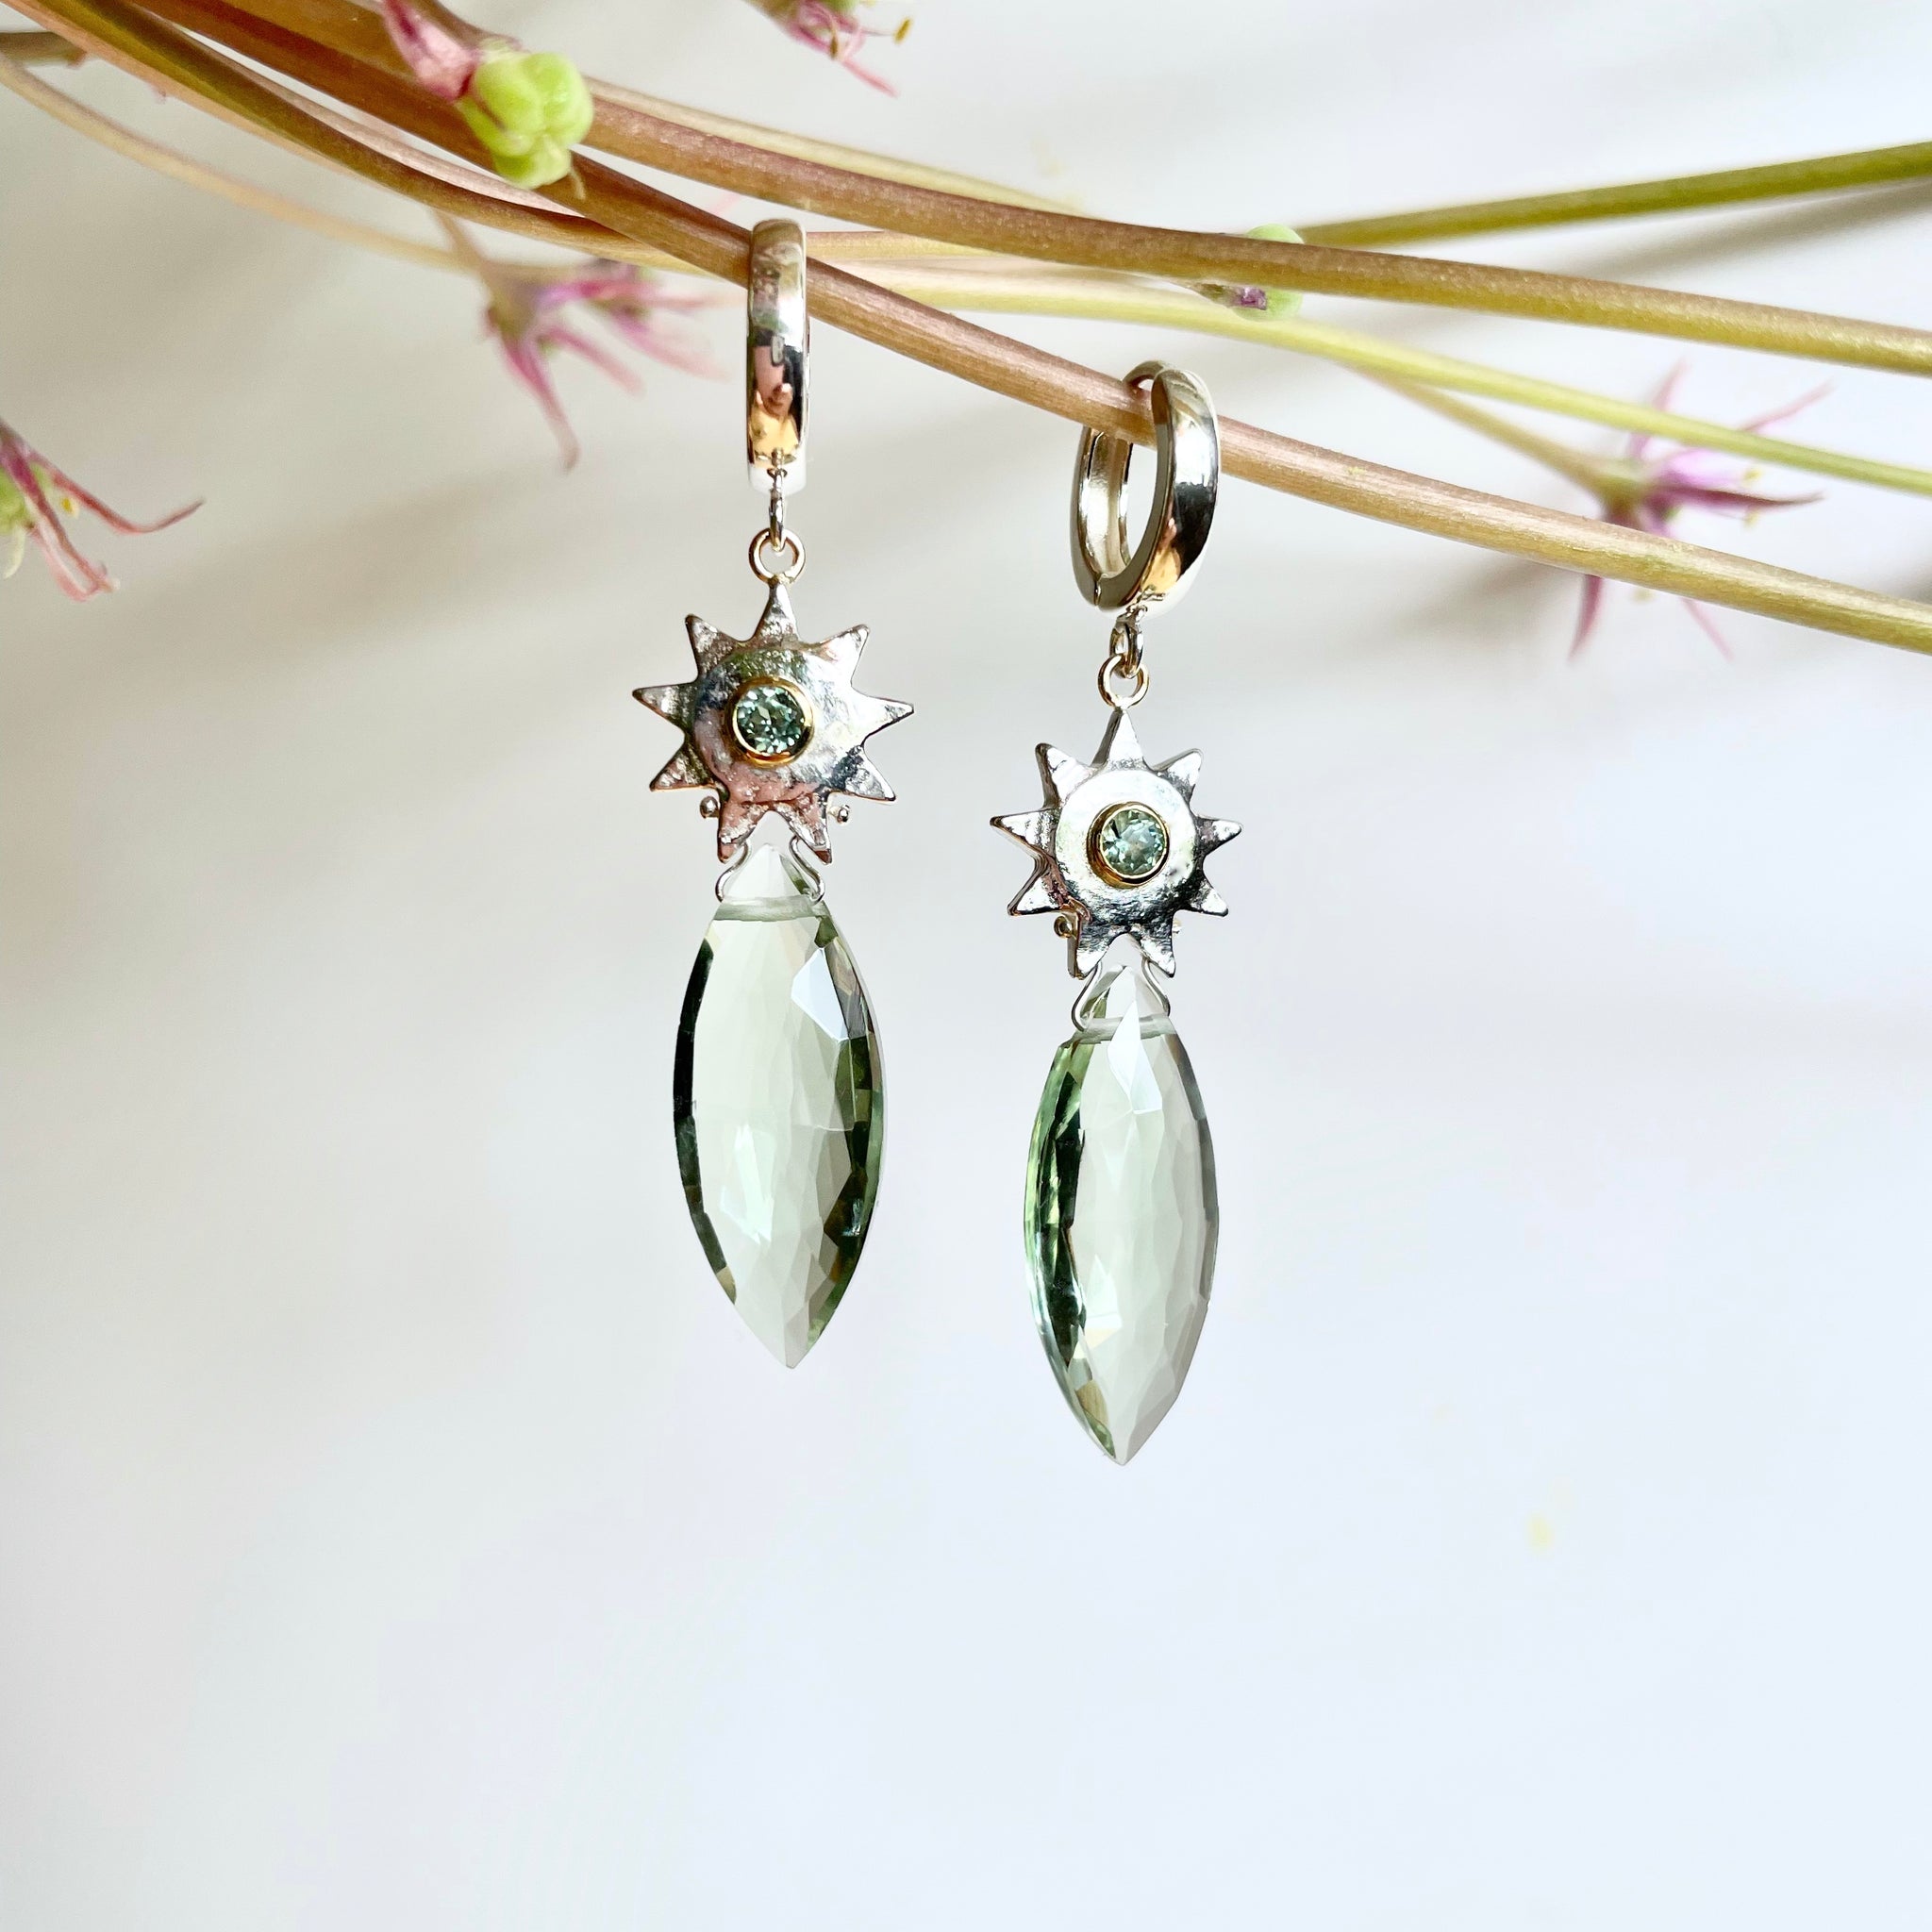 Sun earrings with green amethyst and sapphire